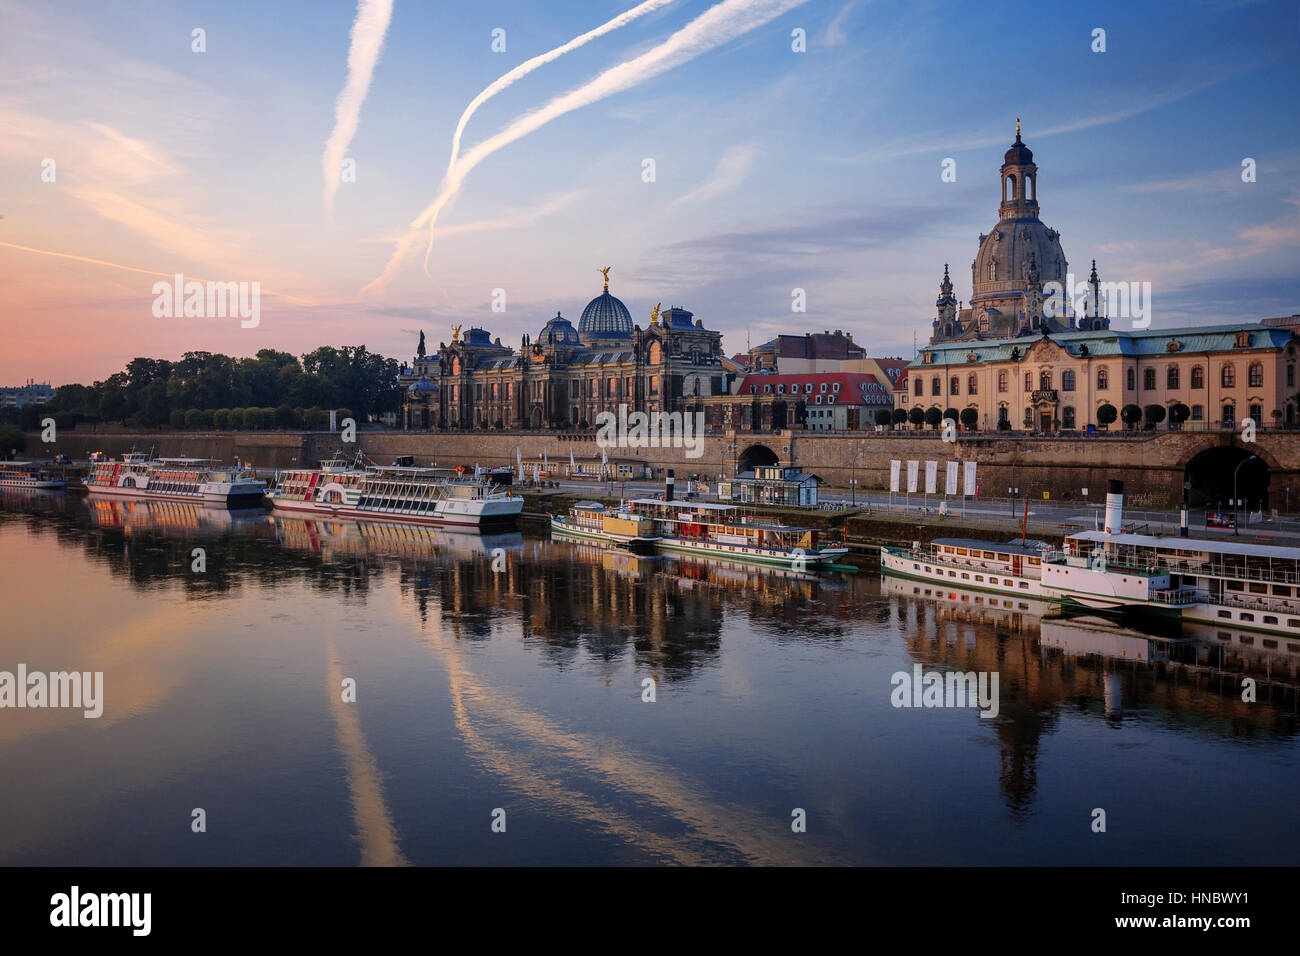 Bruhl's Terrace and River Elbe at sunrise, Dresden, Germany Stock Photo